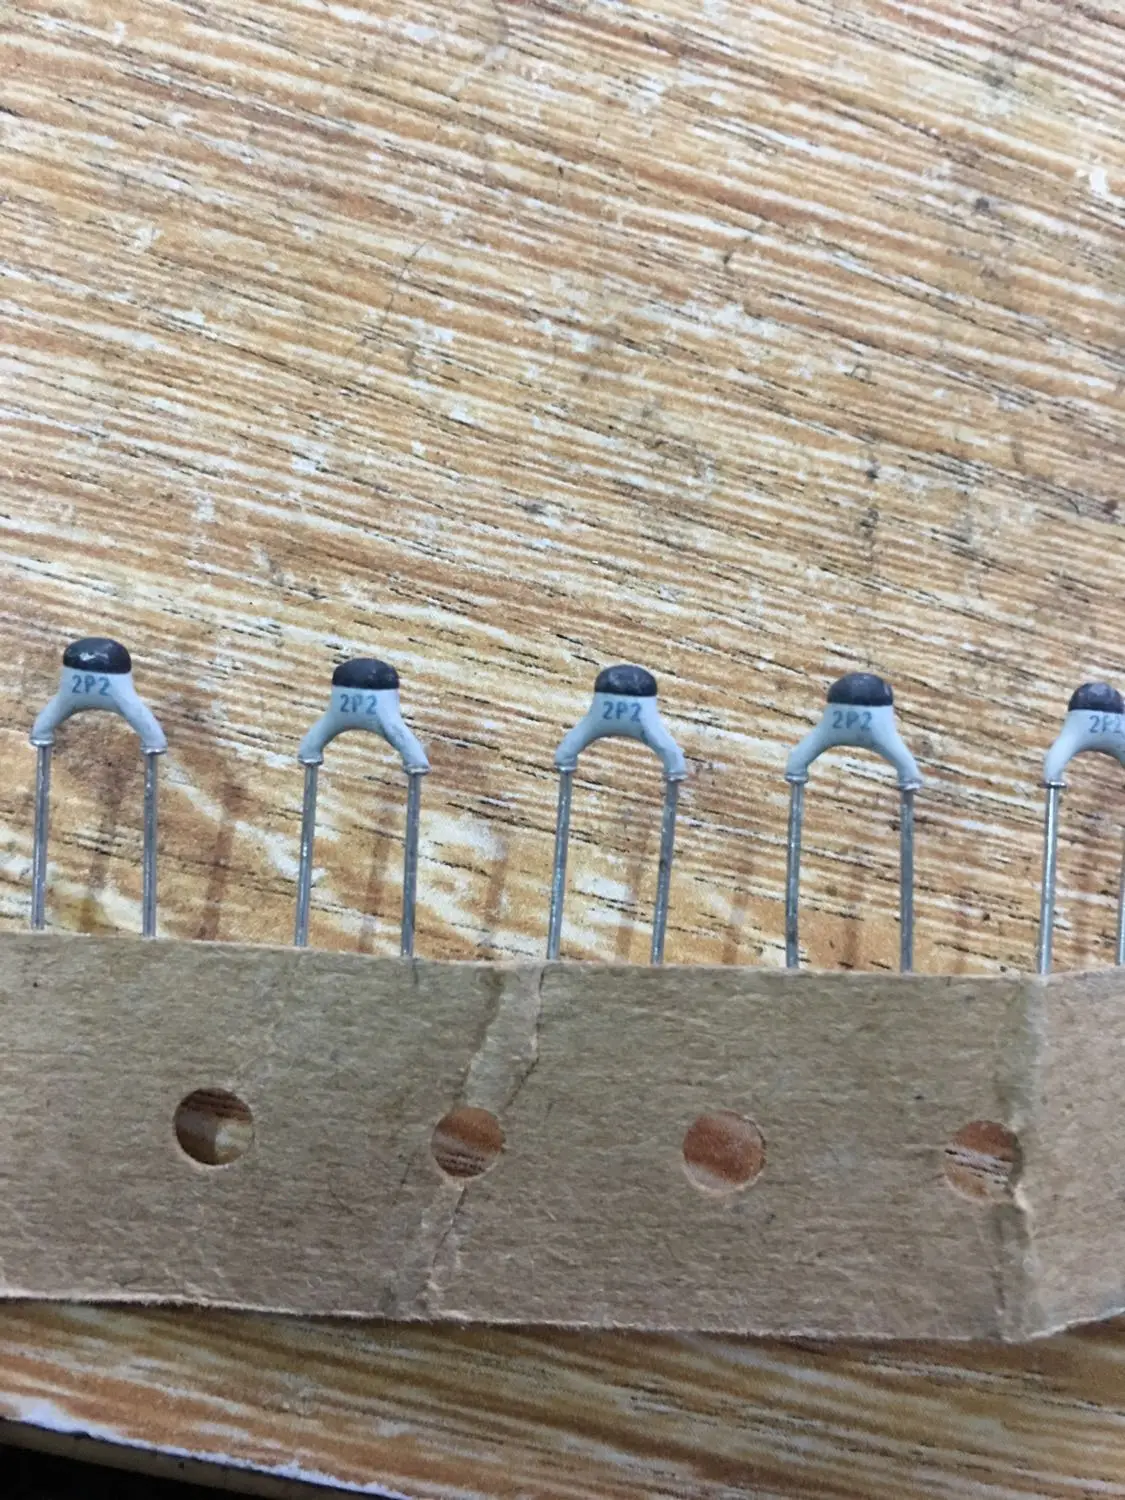 

2019 hot sale Holland BC 20PCS/50PCS High Frequency Silver Film Ceramic Capacitors 100v 2P2 2.2PF 2.2P P=5MM free shipping